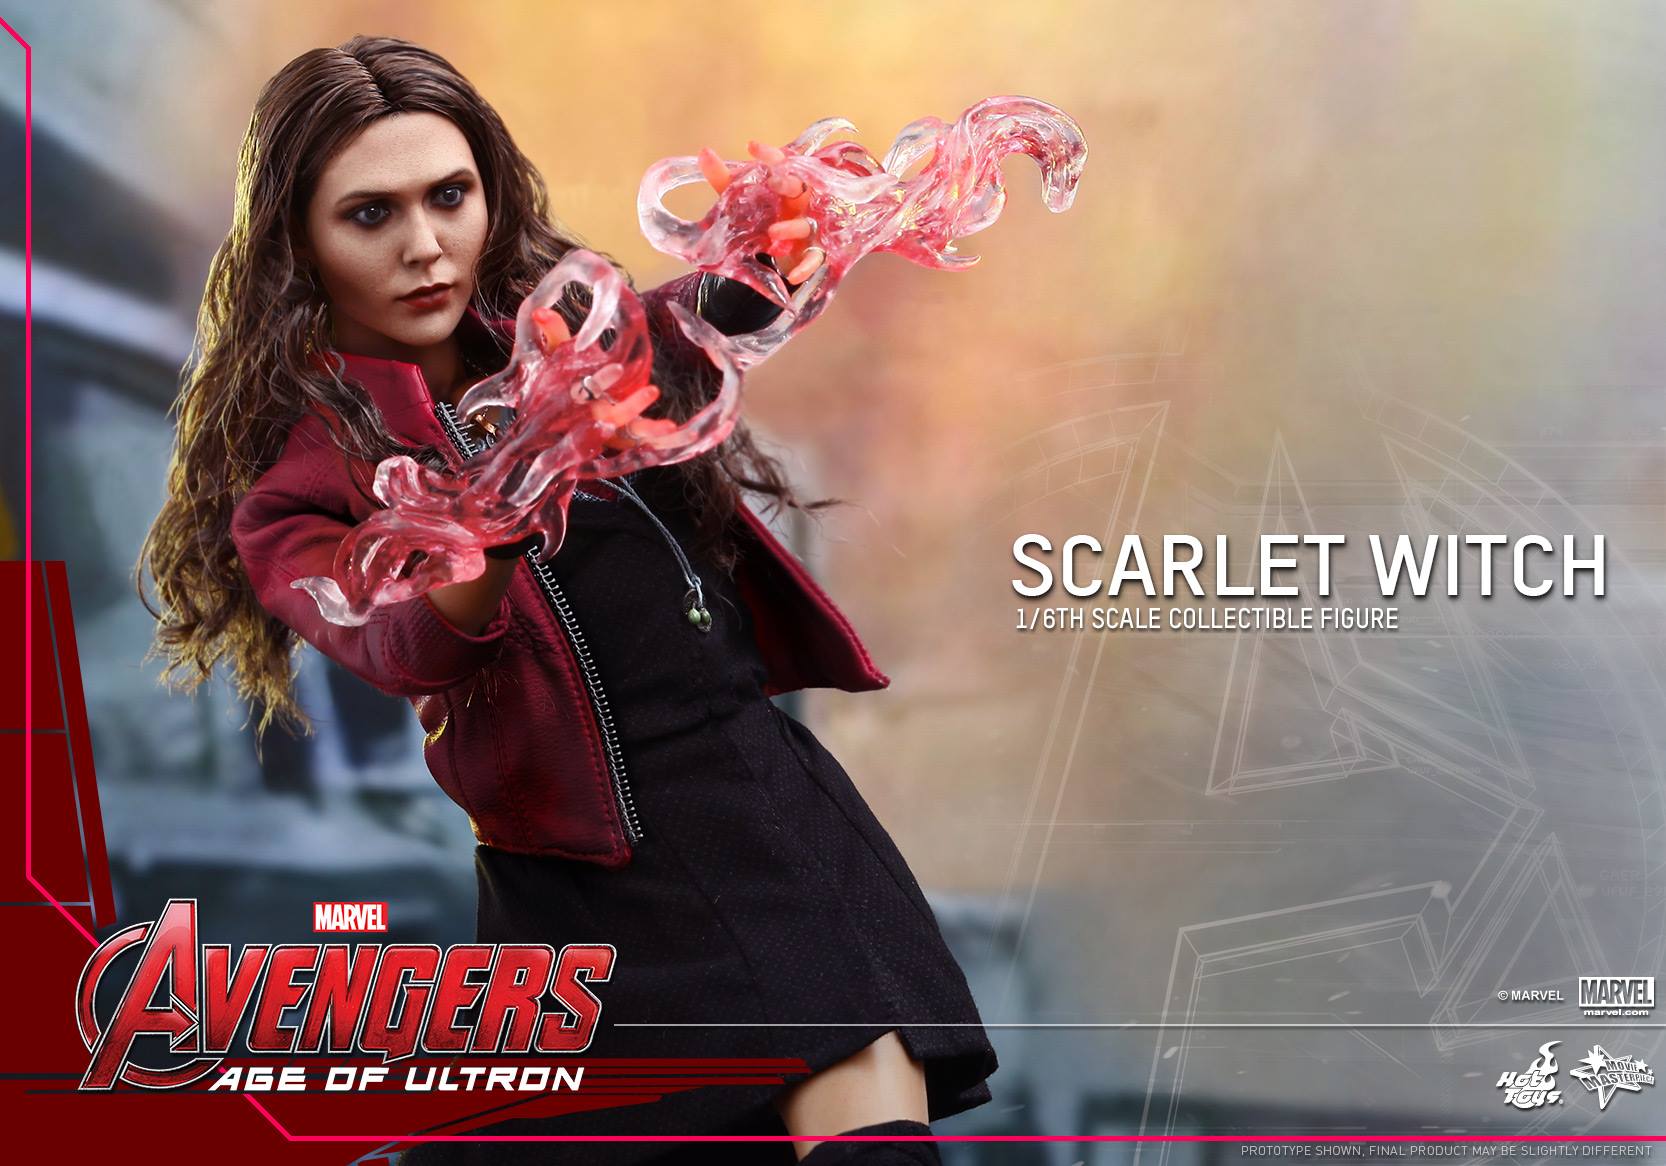 Scarlet Witch & Quicksilver Series Announced by Marvel